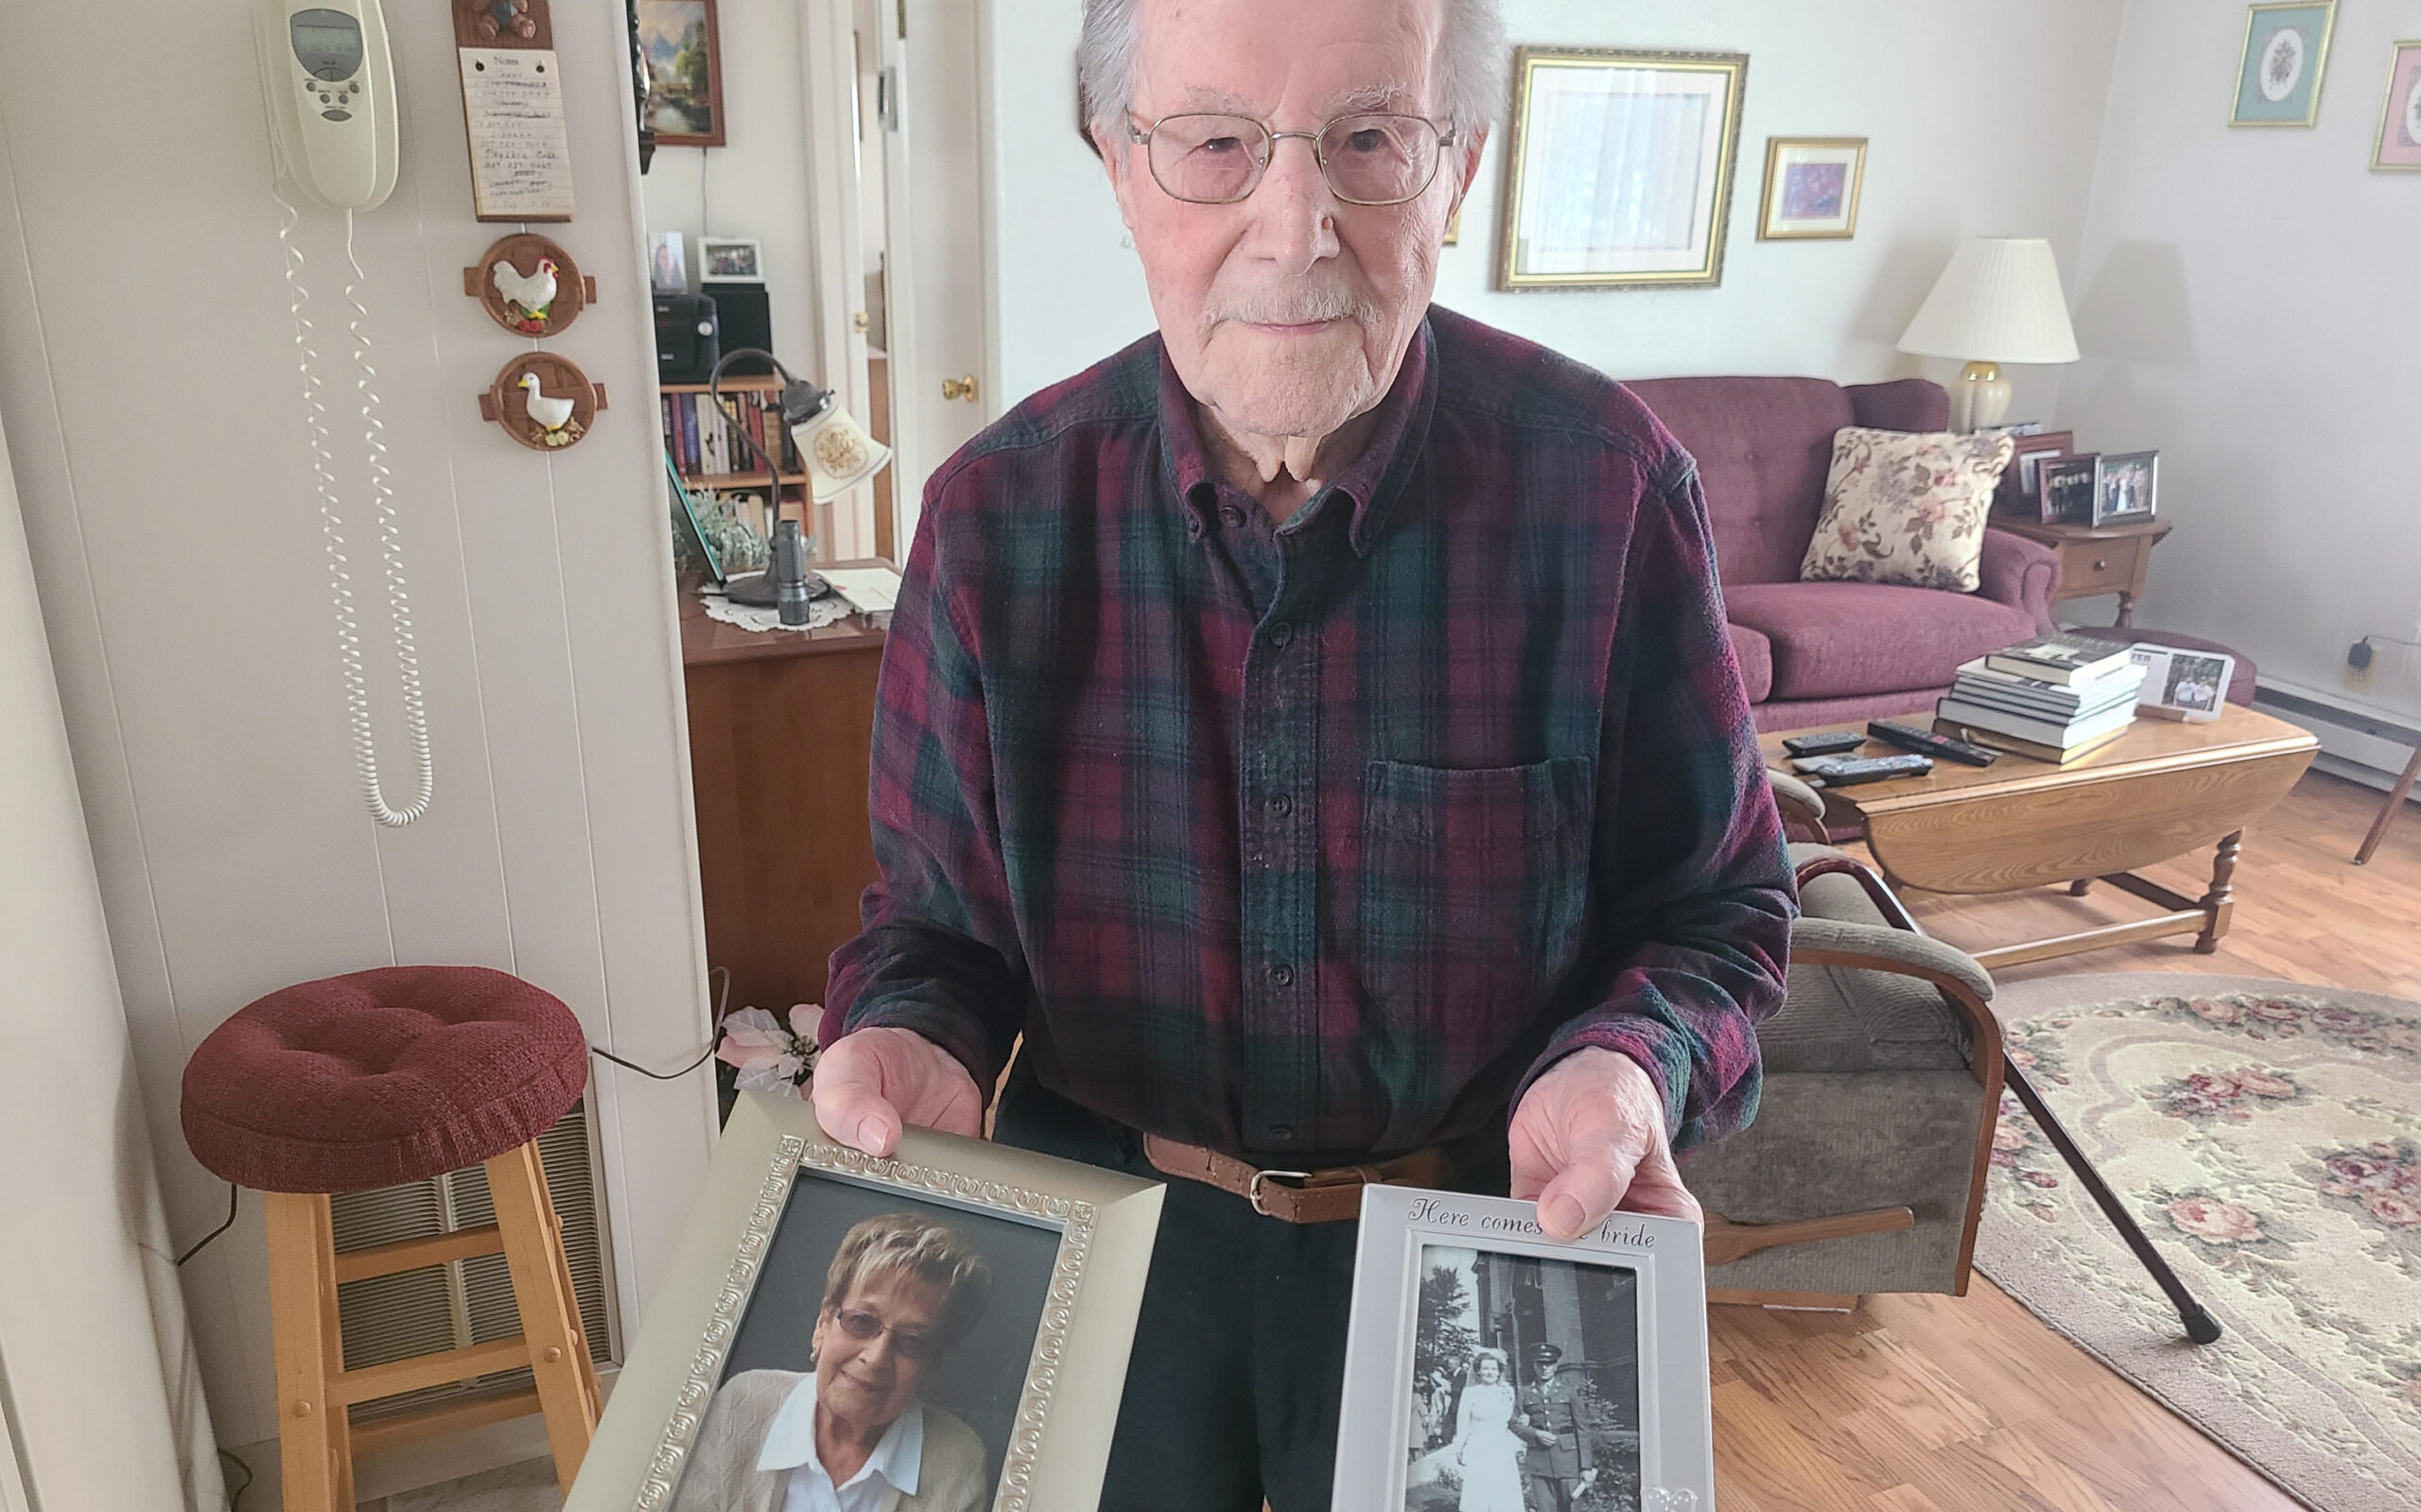 Armand Martin poses with photos of his two wives, both named Yvette in Madawaska on Feb. 11. (Emily Jerkins | St John Valley Times)